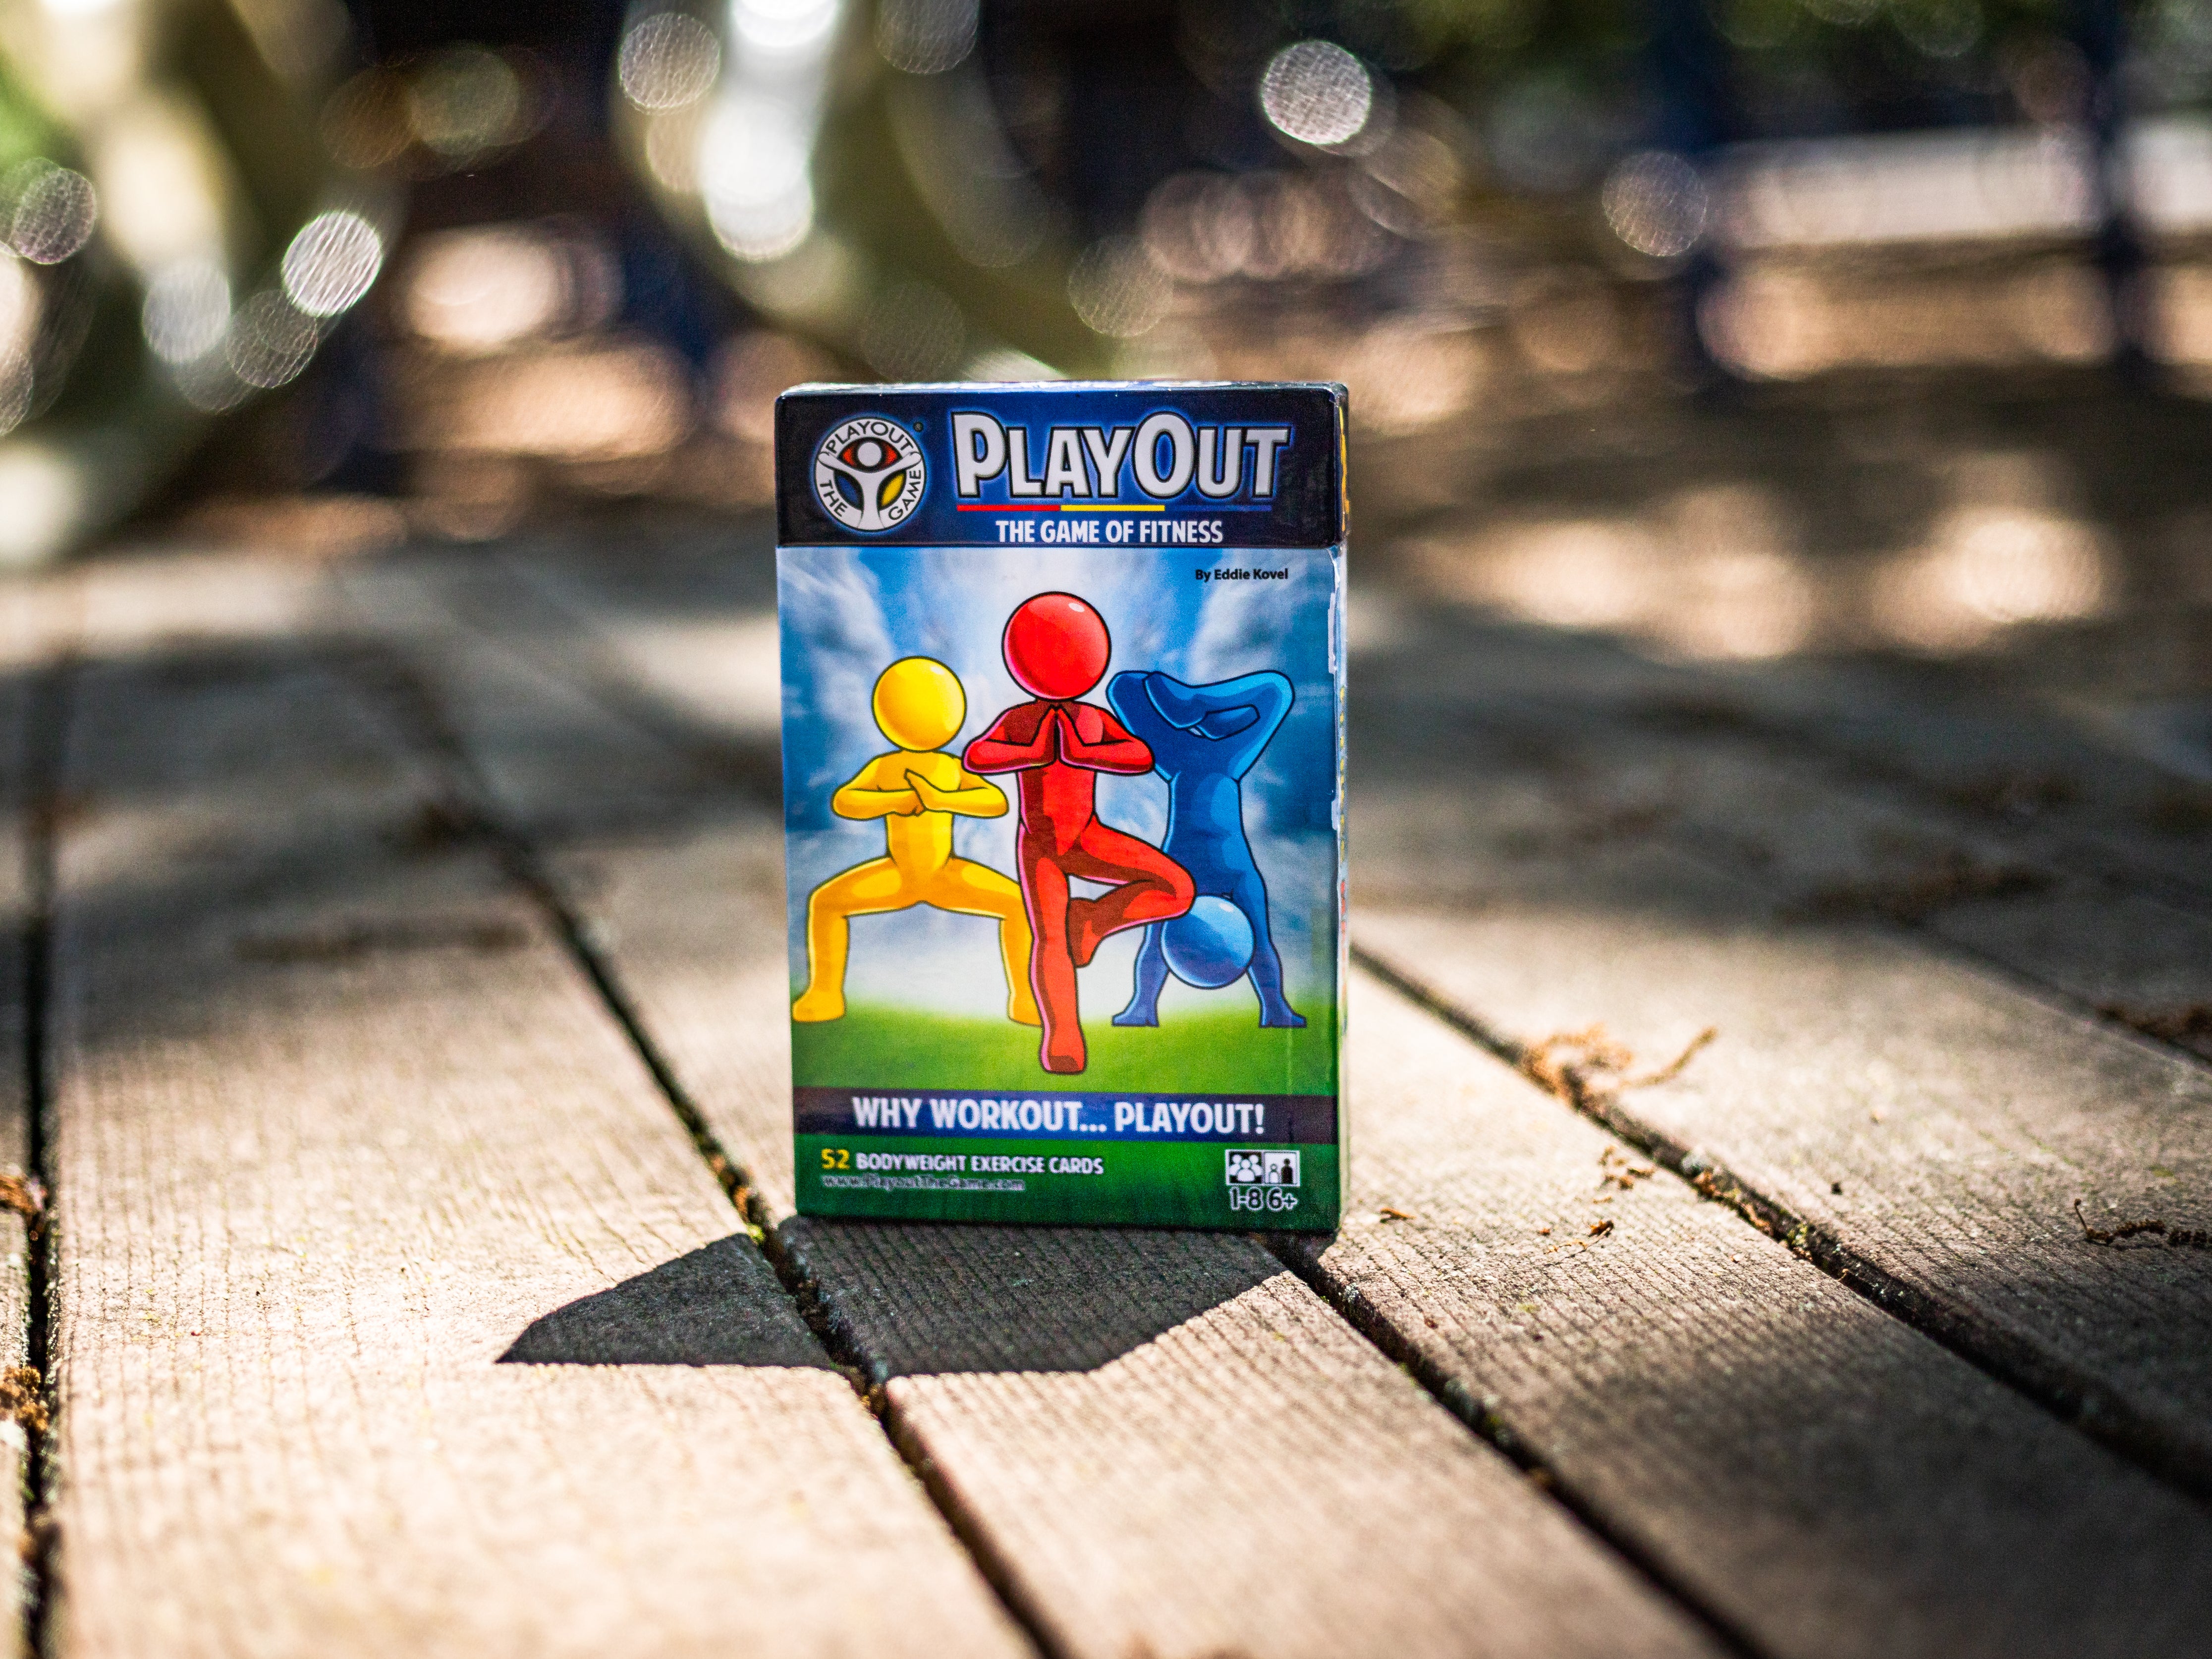 Playout: The Game of Fitness